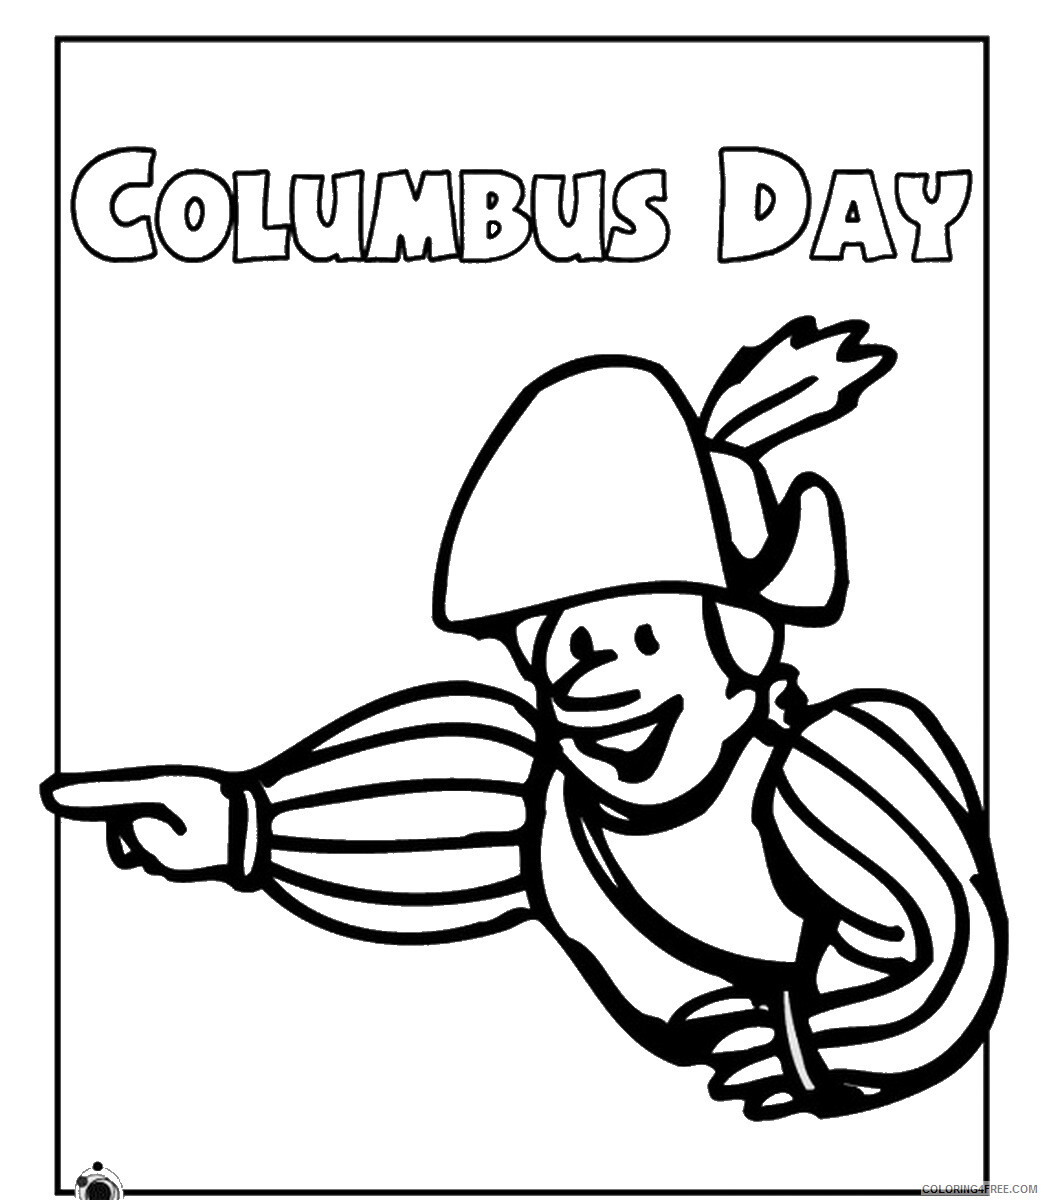 Columbus Day Coloring Pages Holiday colombus_day_coloring7 Printable 2021 0133 Coloring4free